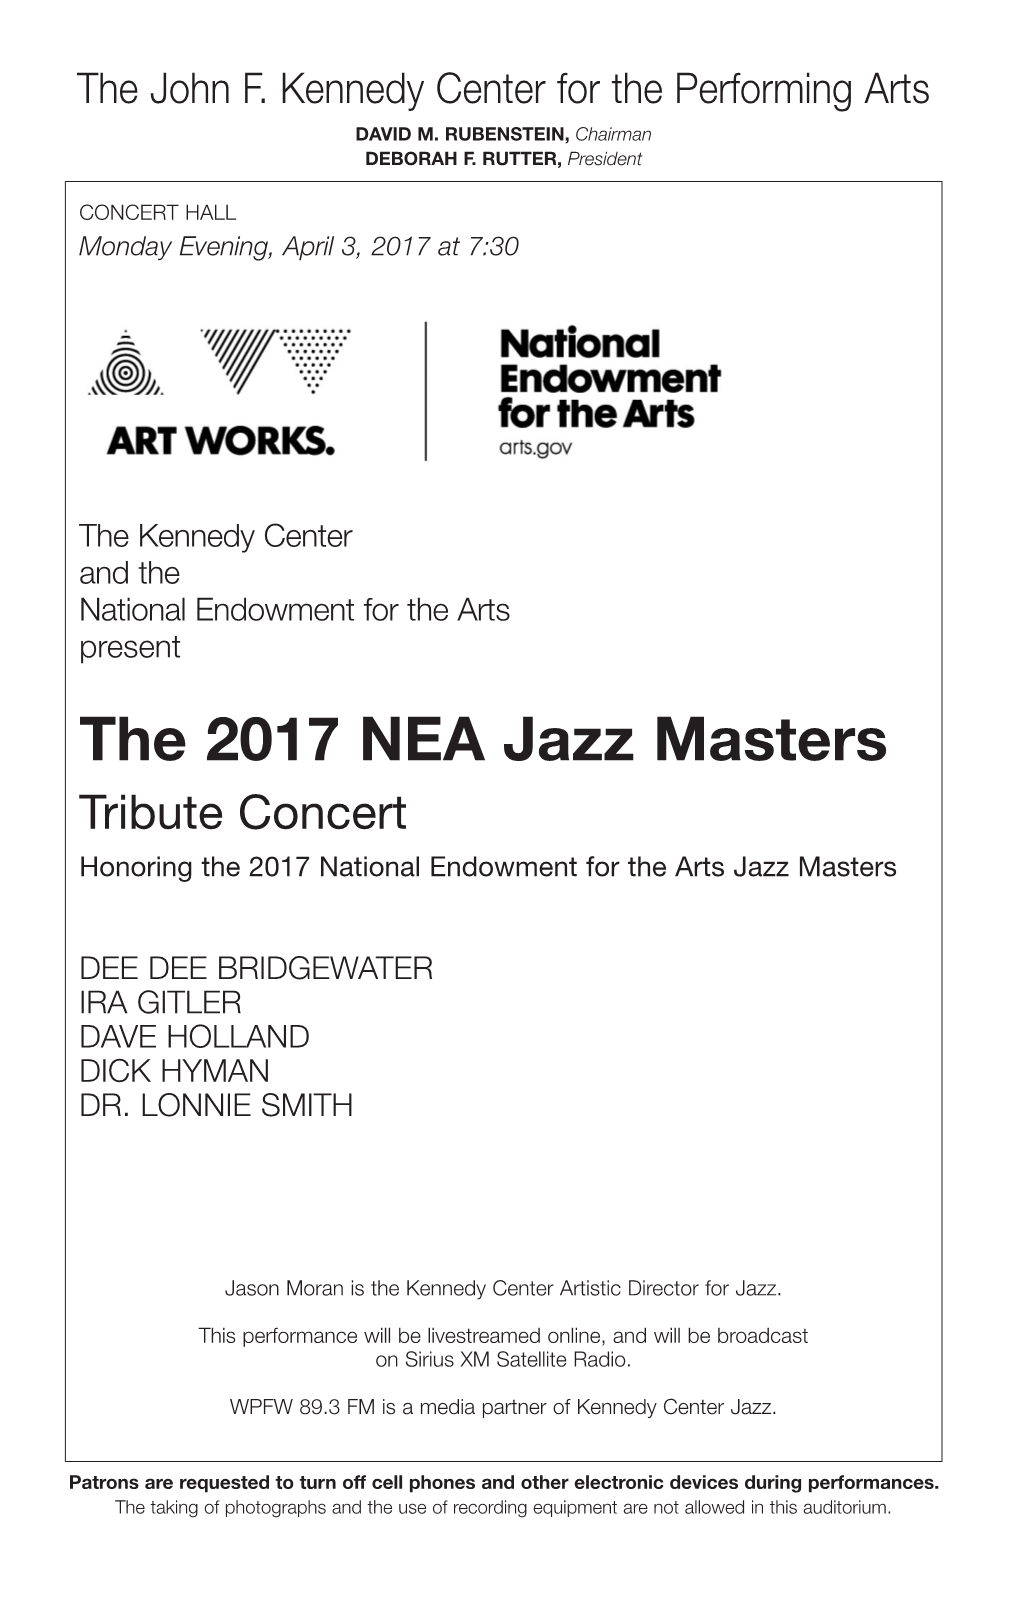 The 2017 NEA Jazz Masters Tribute Concert Honoring the 2017 National Endowment for the Arts Jazz Masters